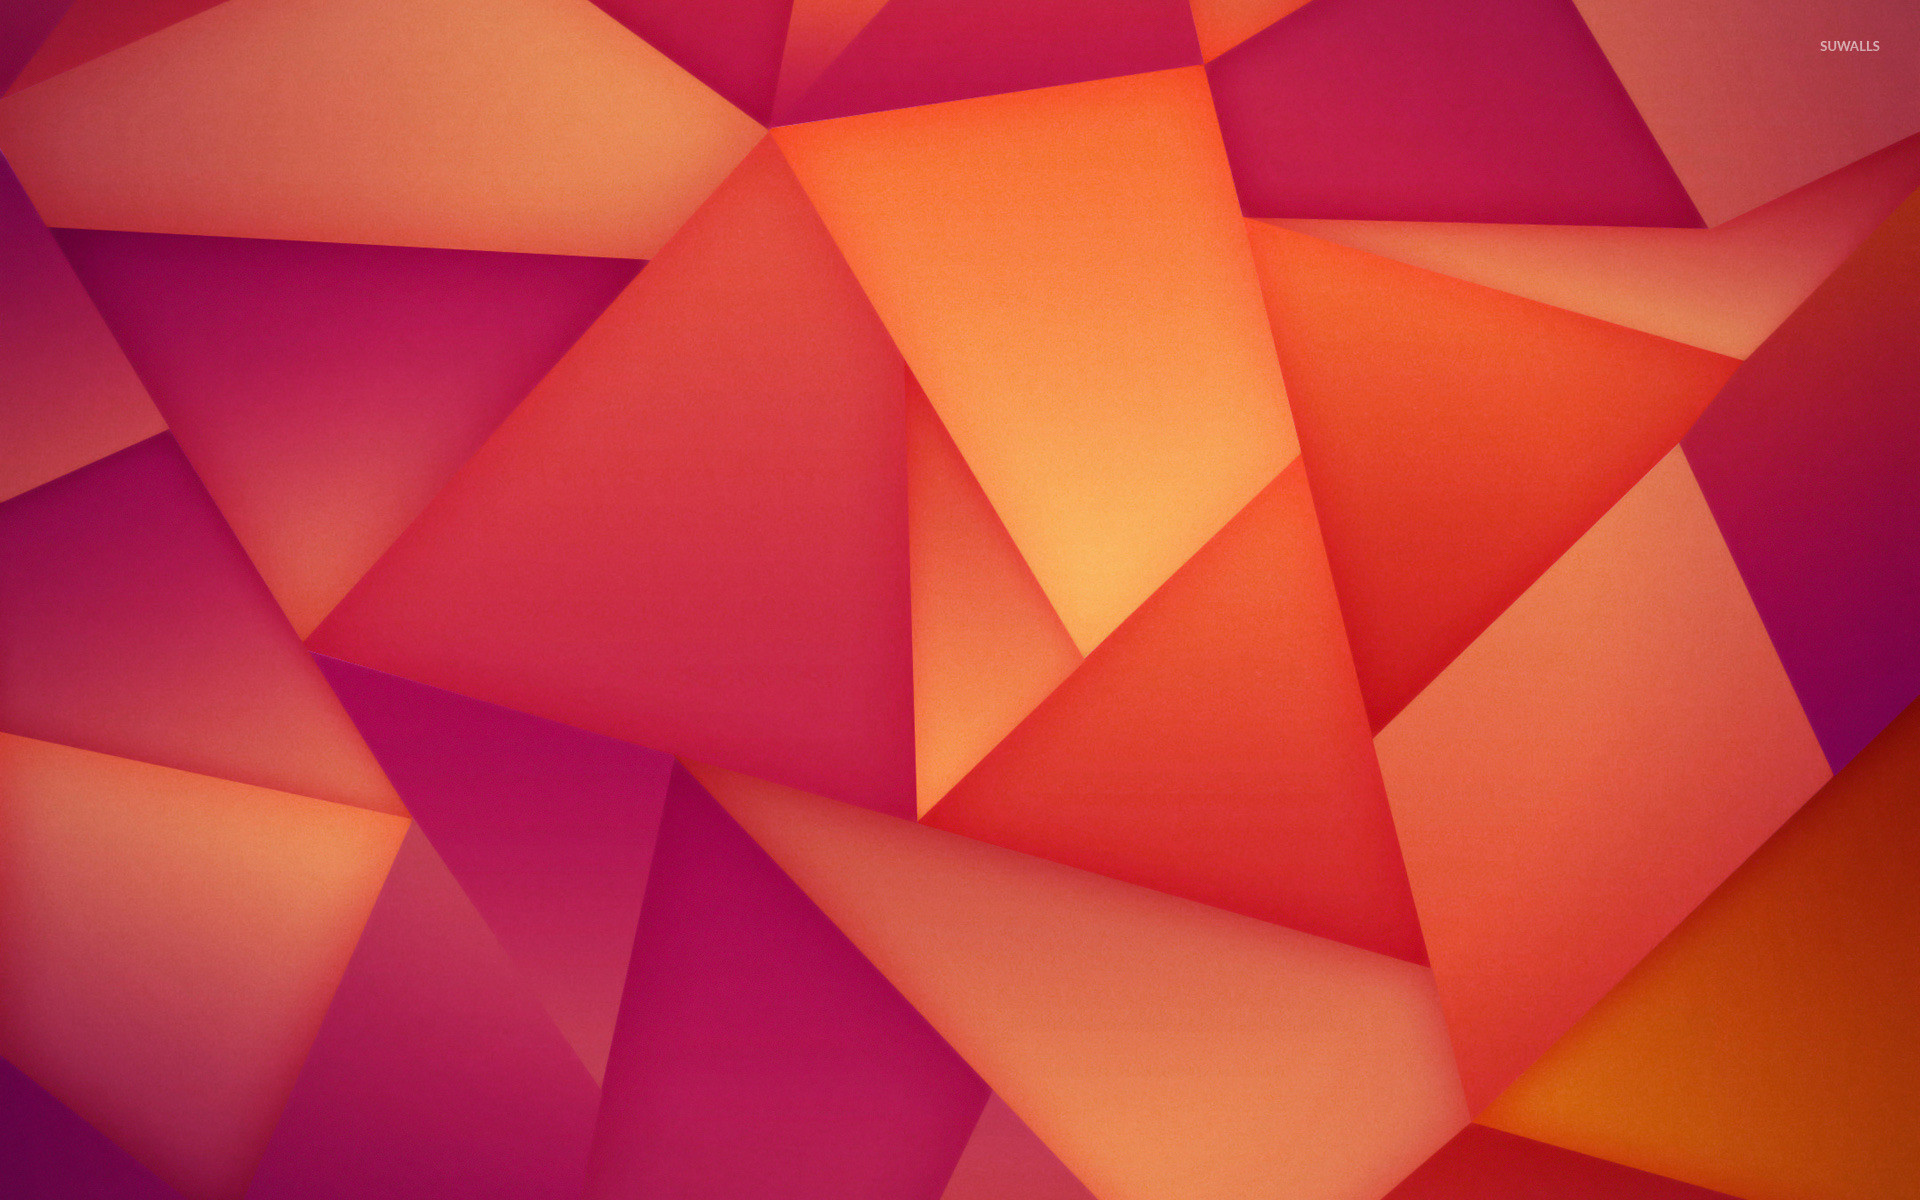 Orange And Purple Polygons Wallpaper Abstract Wallpapers 25819 1280x800 1920x1200